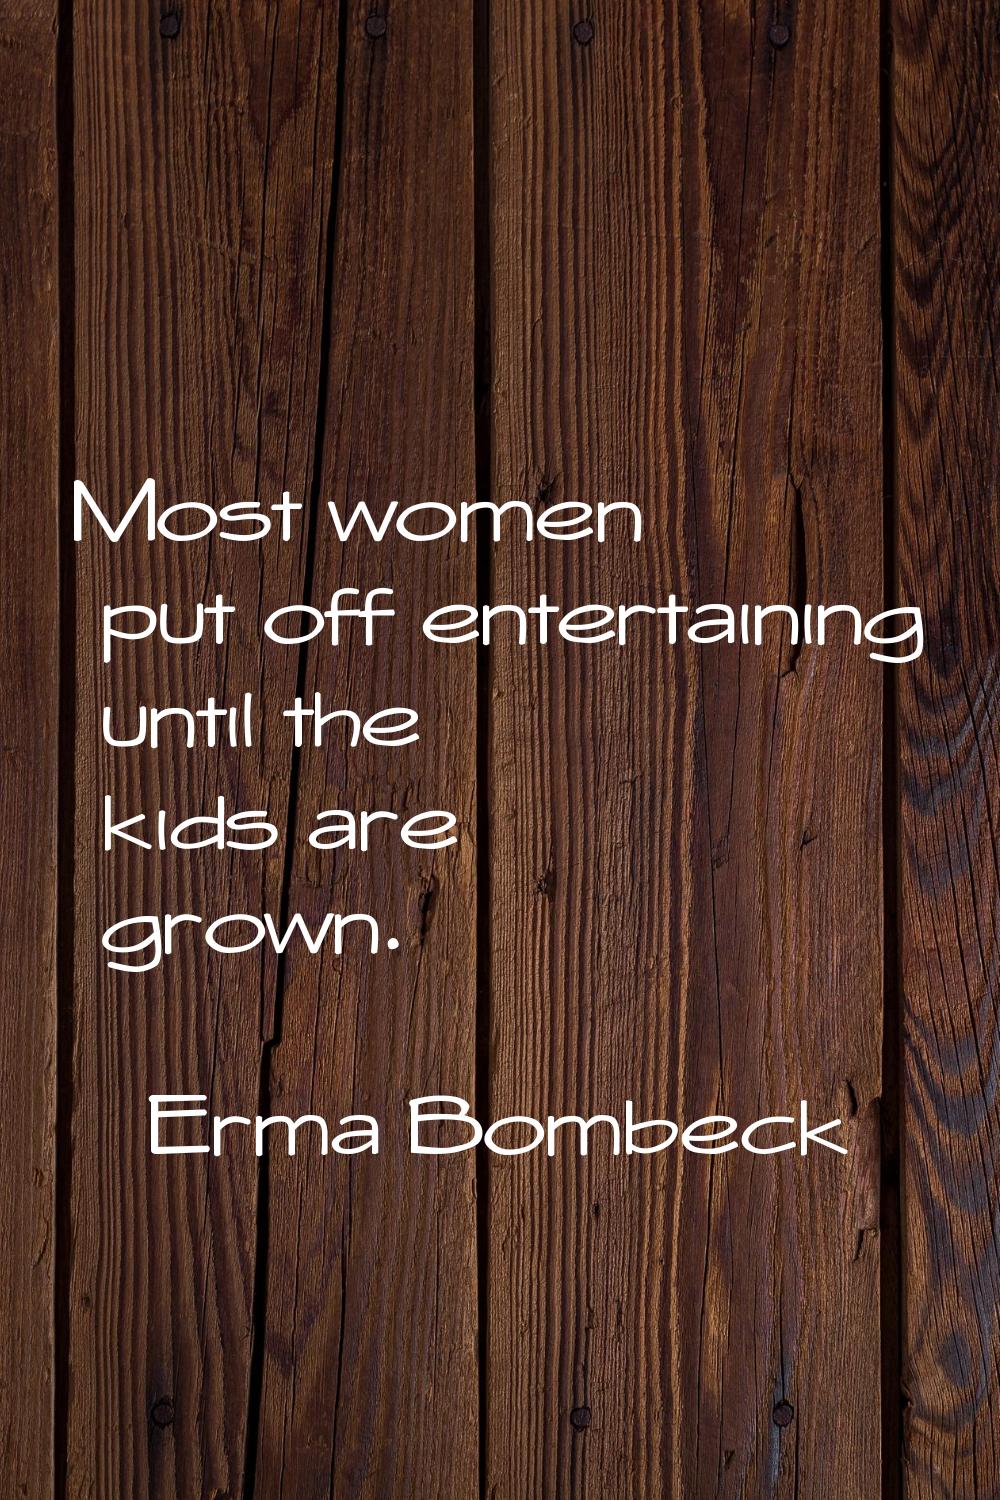 Most women put off entertaining until the kids are grown.